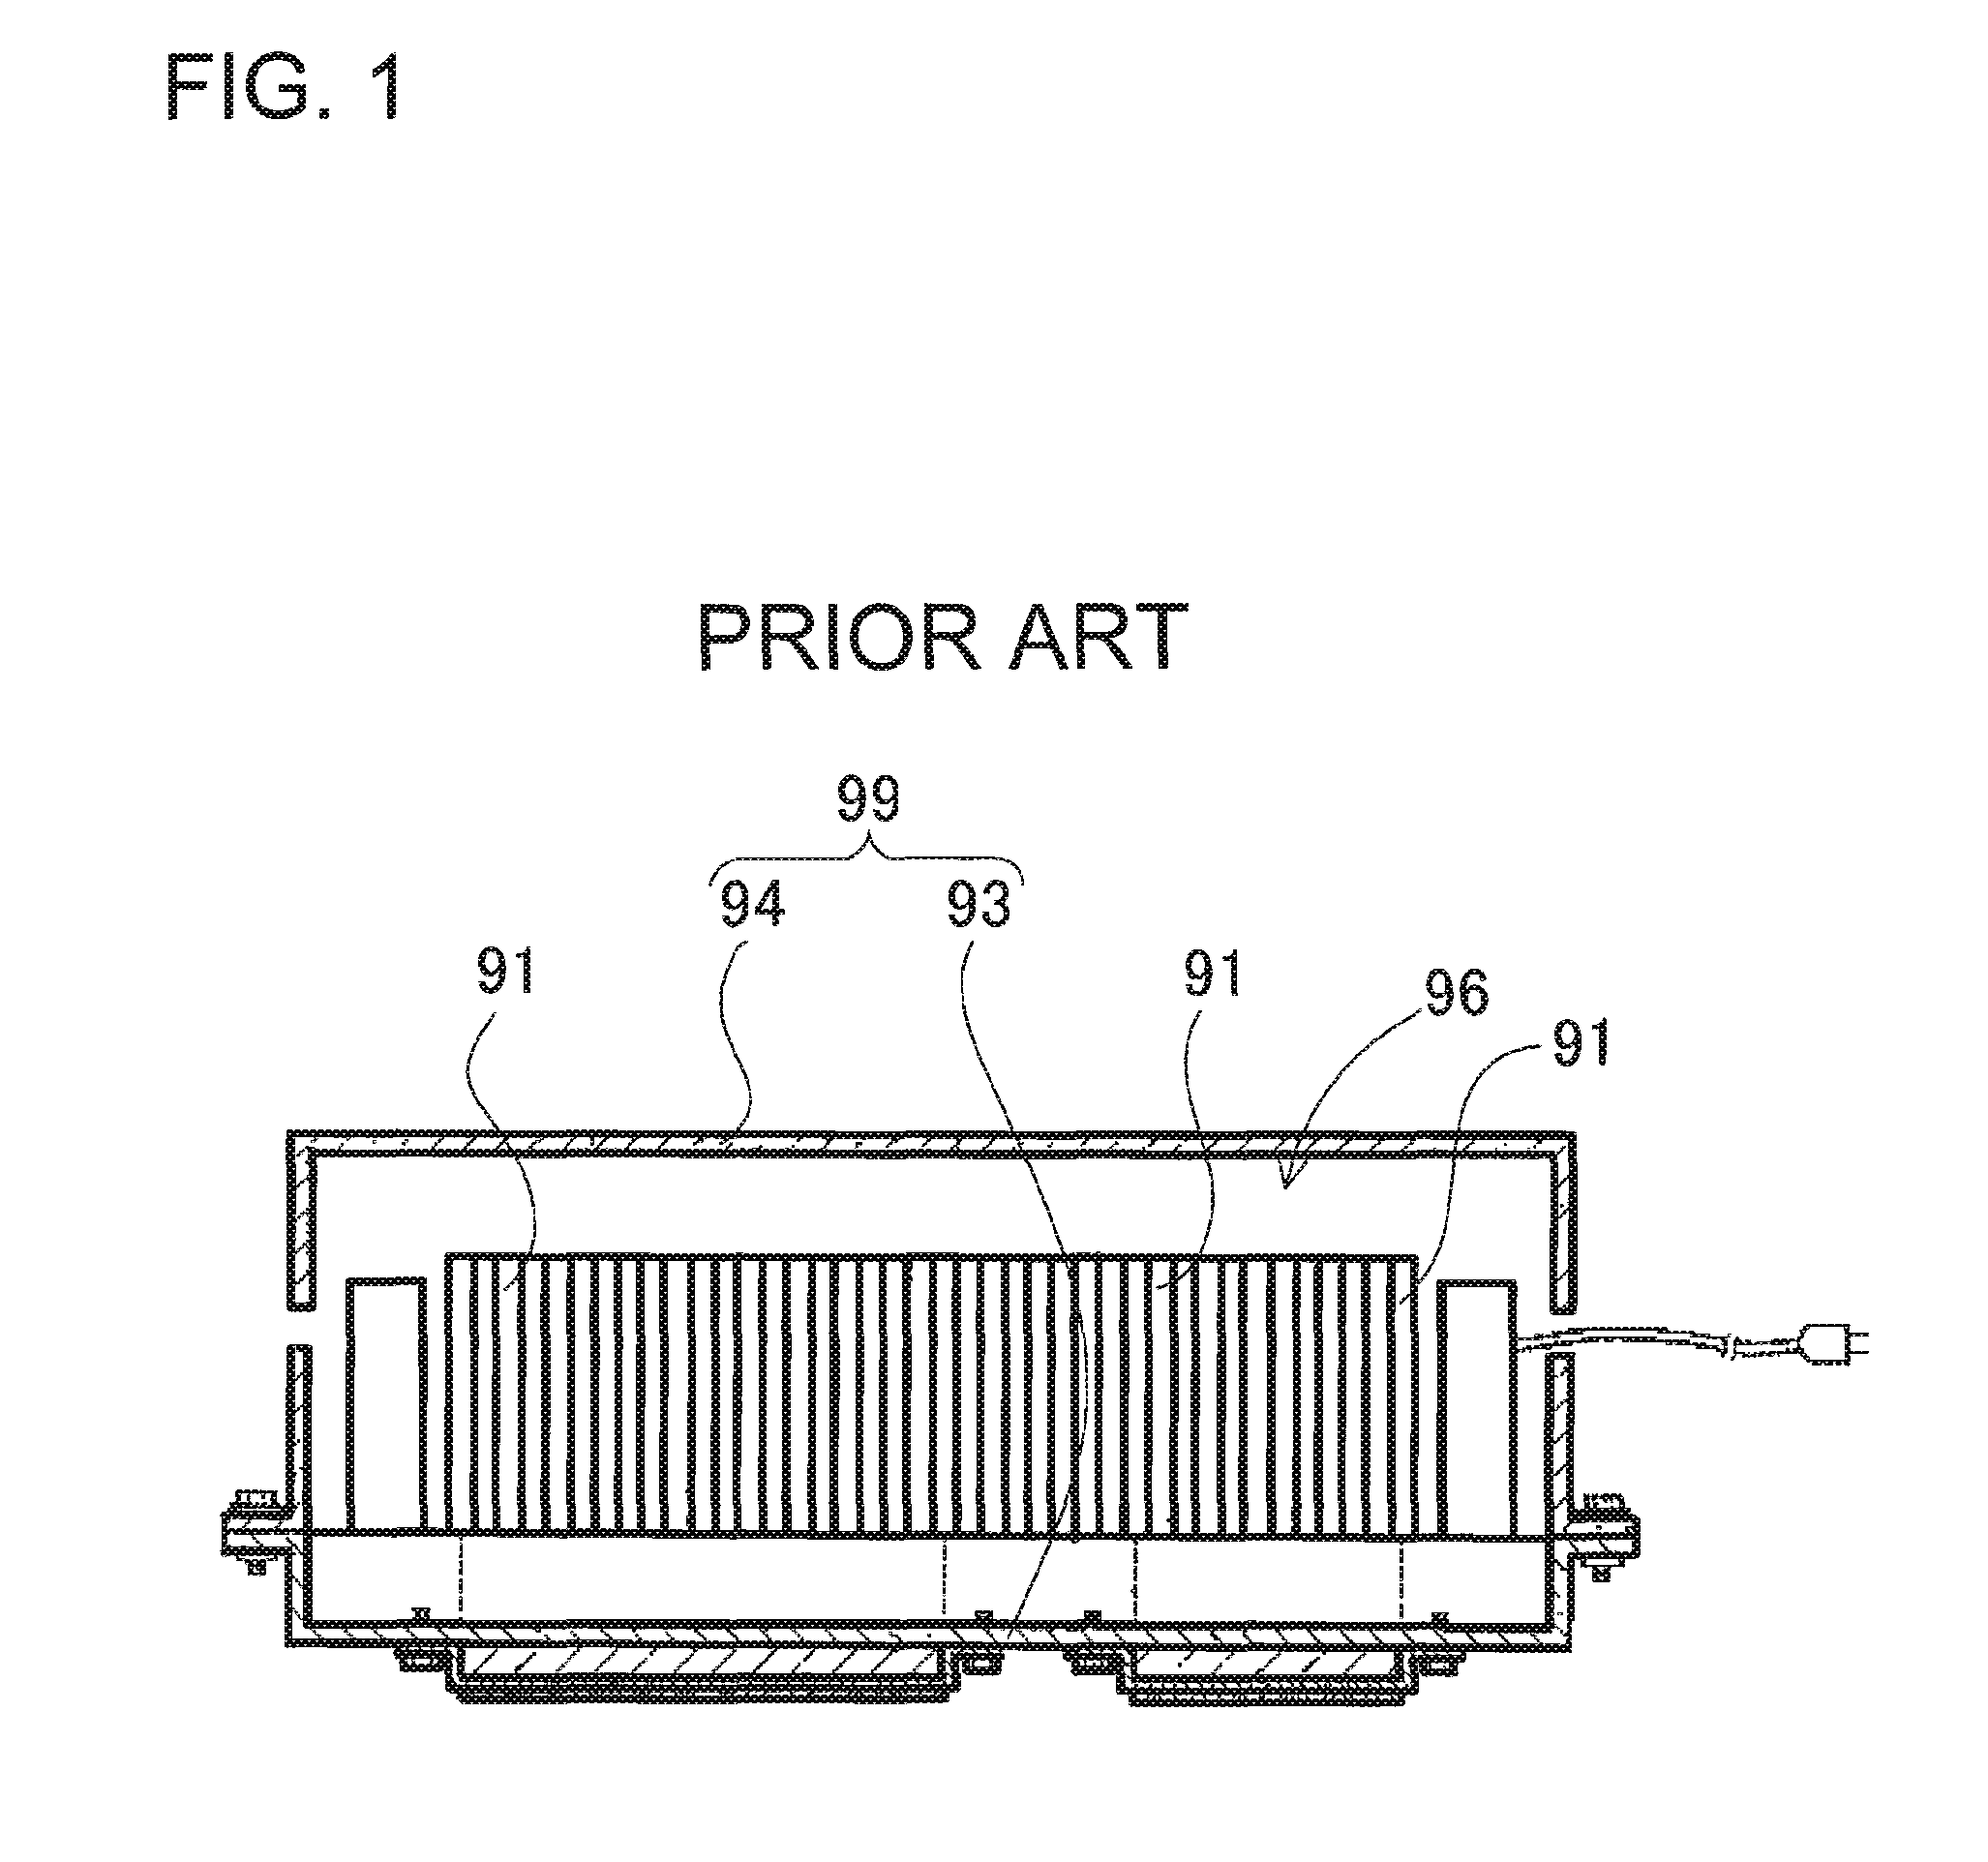 Car battery array having a plurality of connected batteries